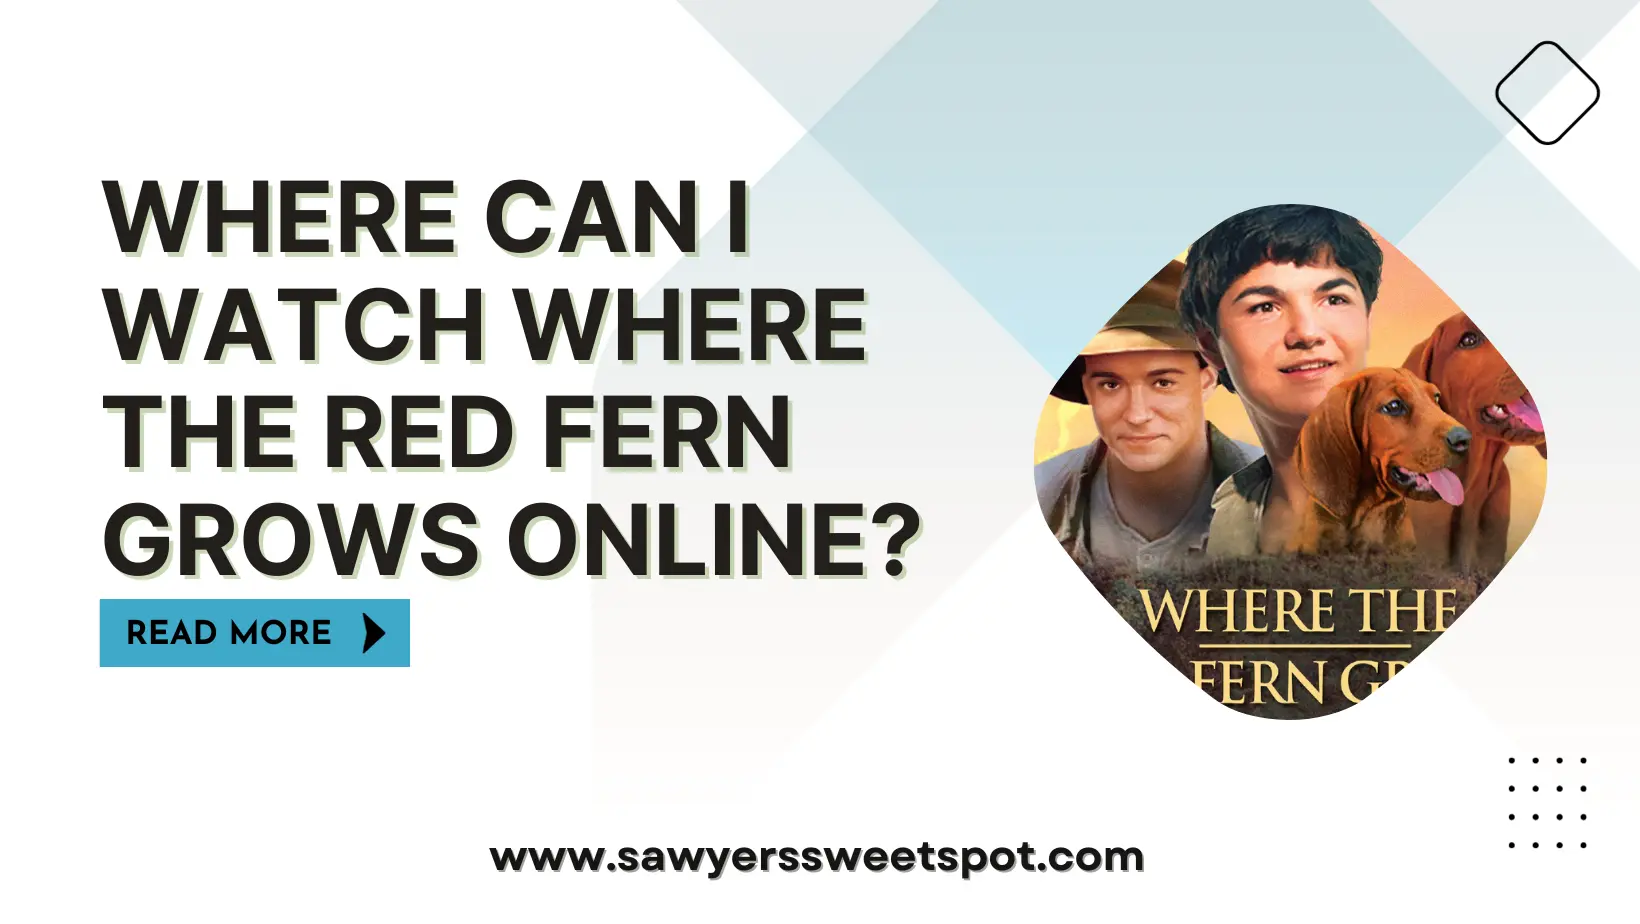 Where Can i Watch Where the Red Fern Grows Online?